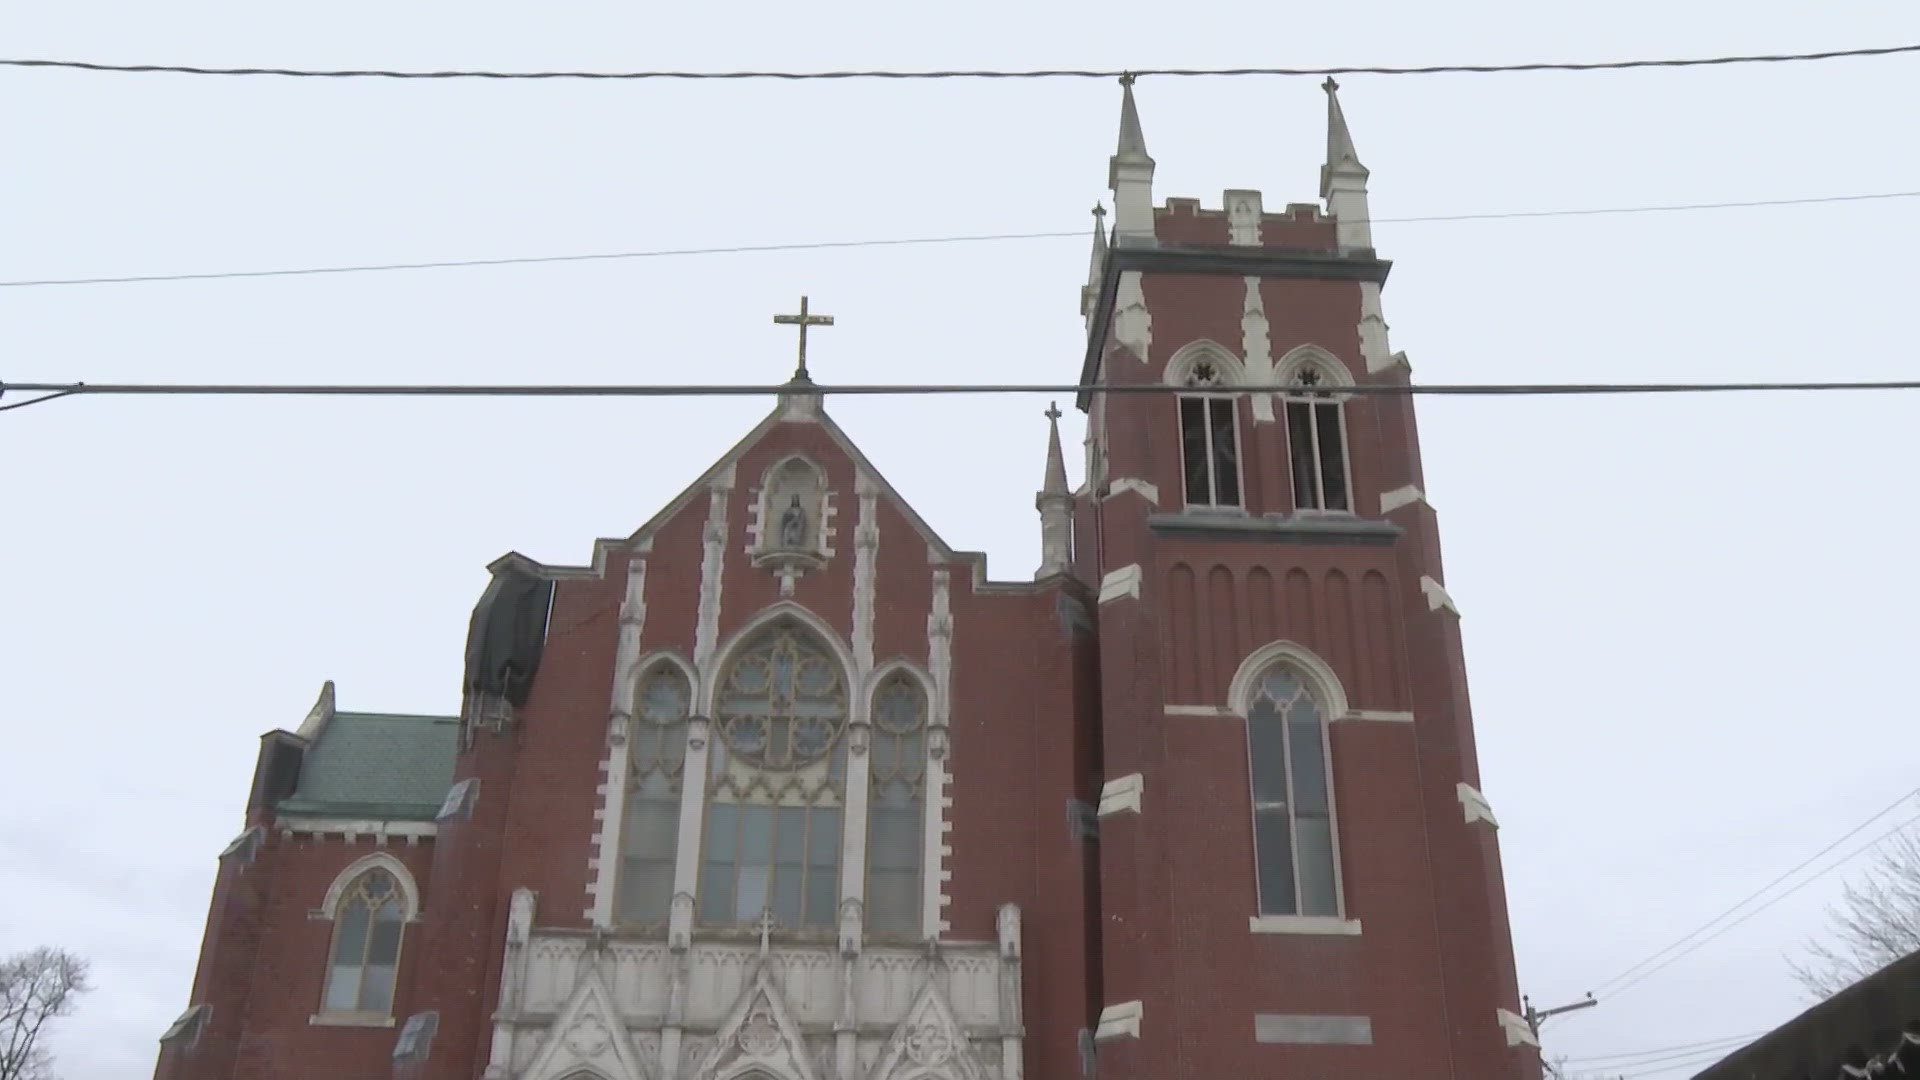 This week, the Auburn City Council approved the sale of the former St. Louis Church to a developer.